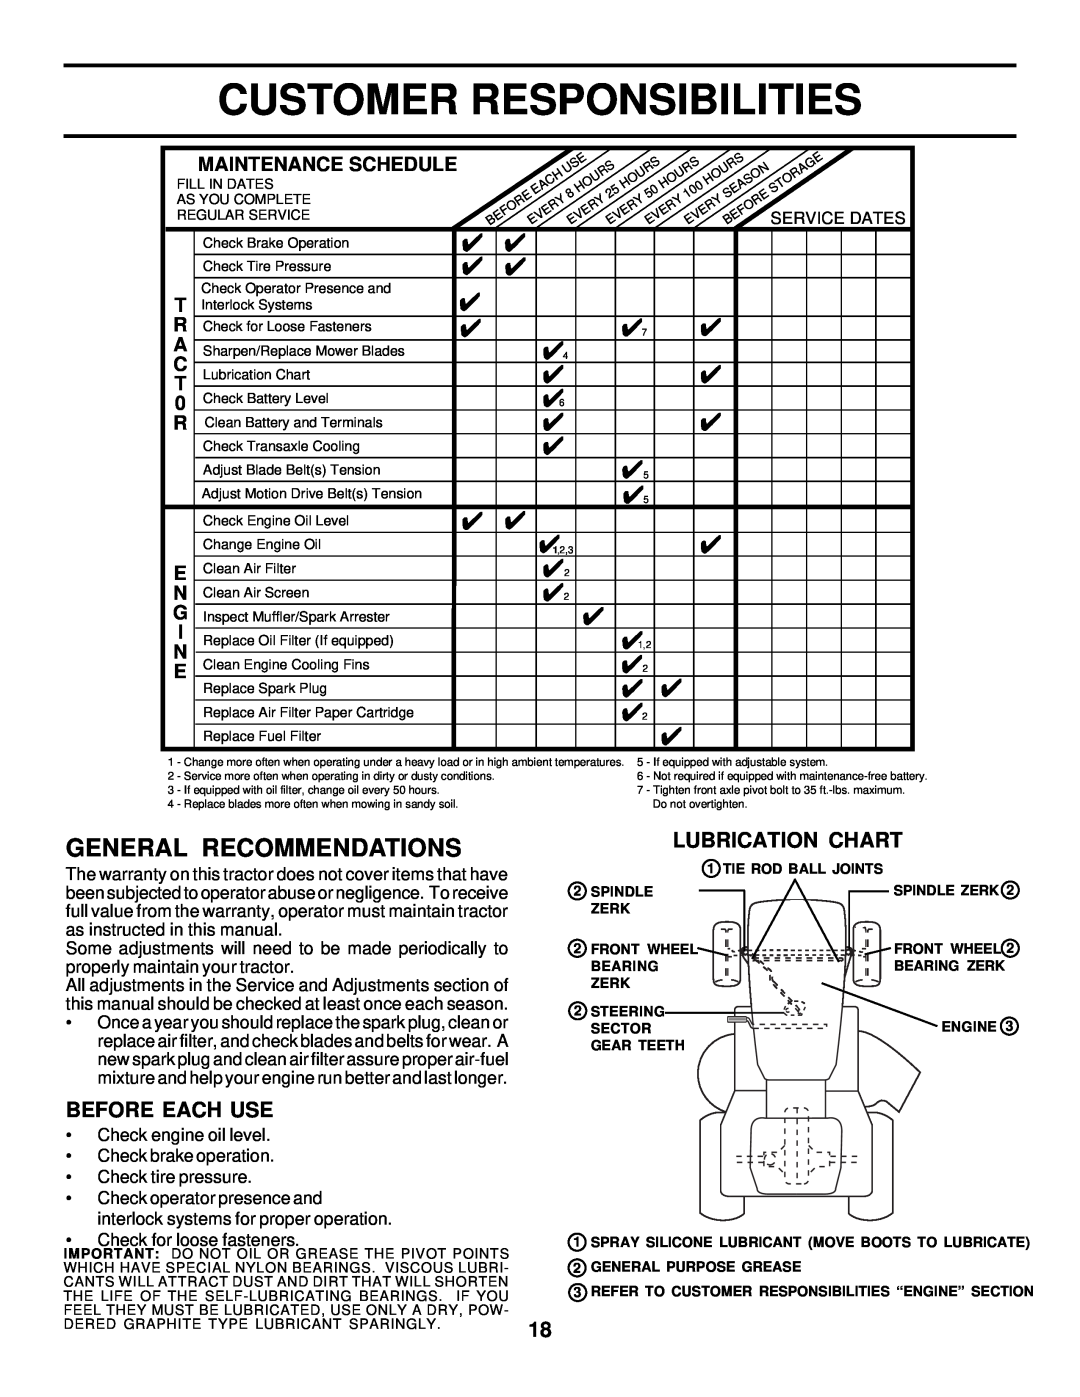 Husqvarna GTH225 owner manual Customer Responsibilities, General Recommendations, Before Each Use, Lubrication Chart 